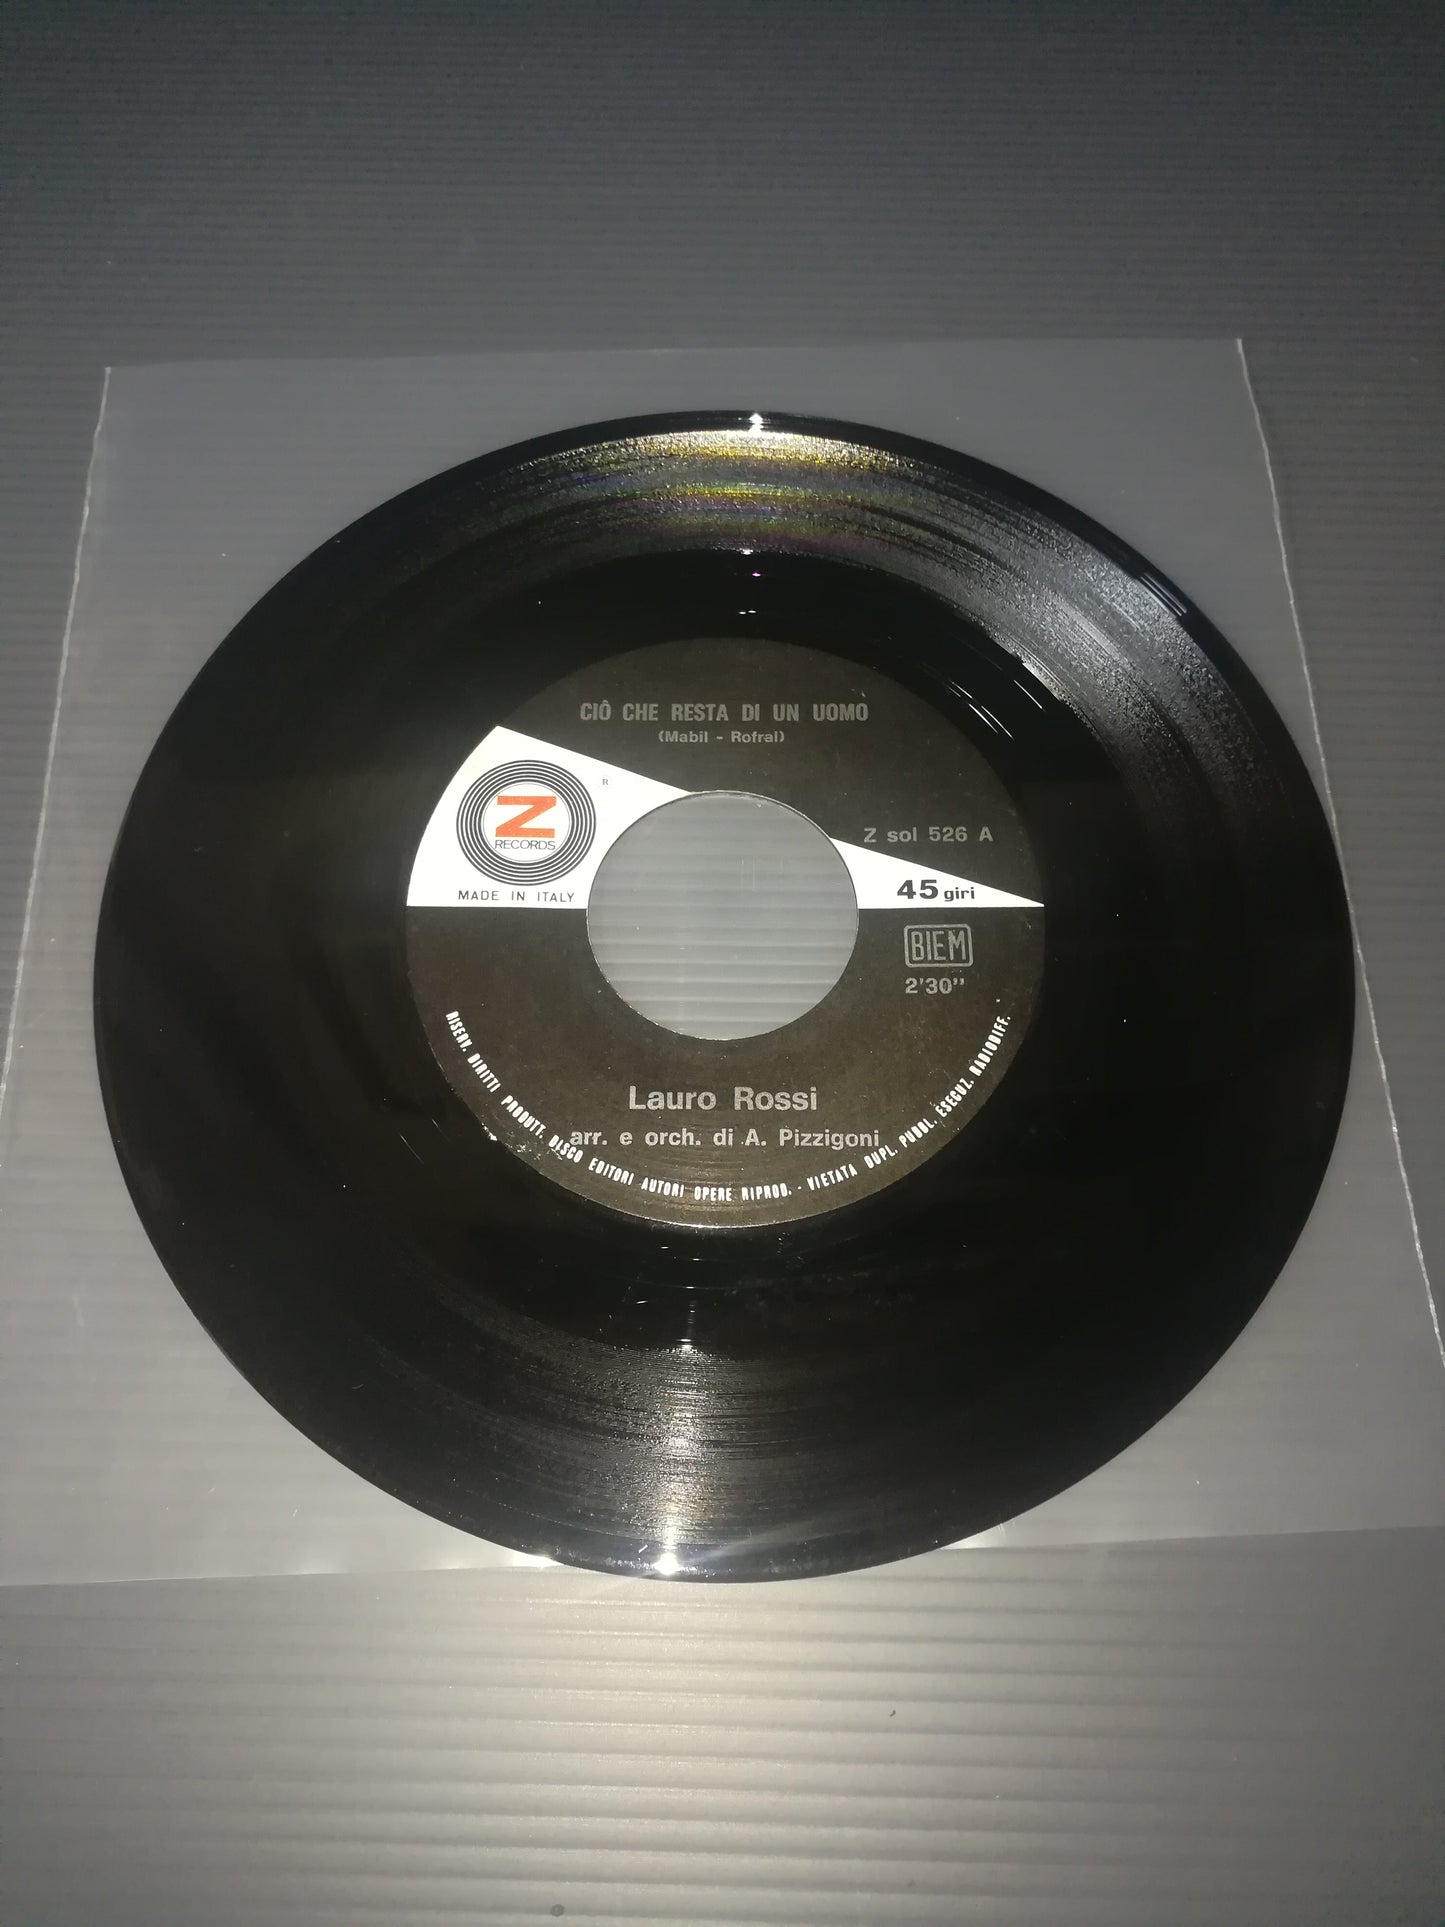 "What remains of a man/The life that was for us" Lauro Rossi 45 rpm